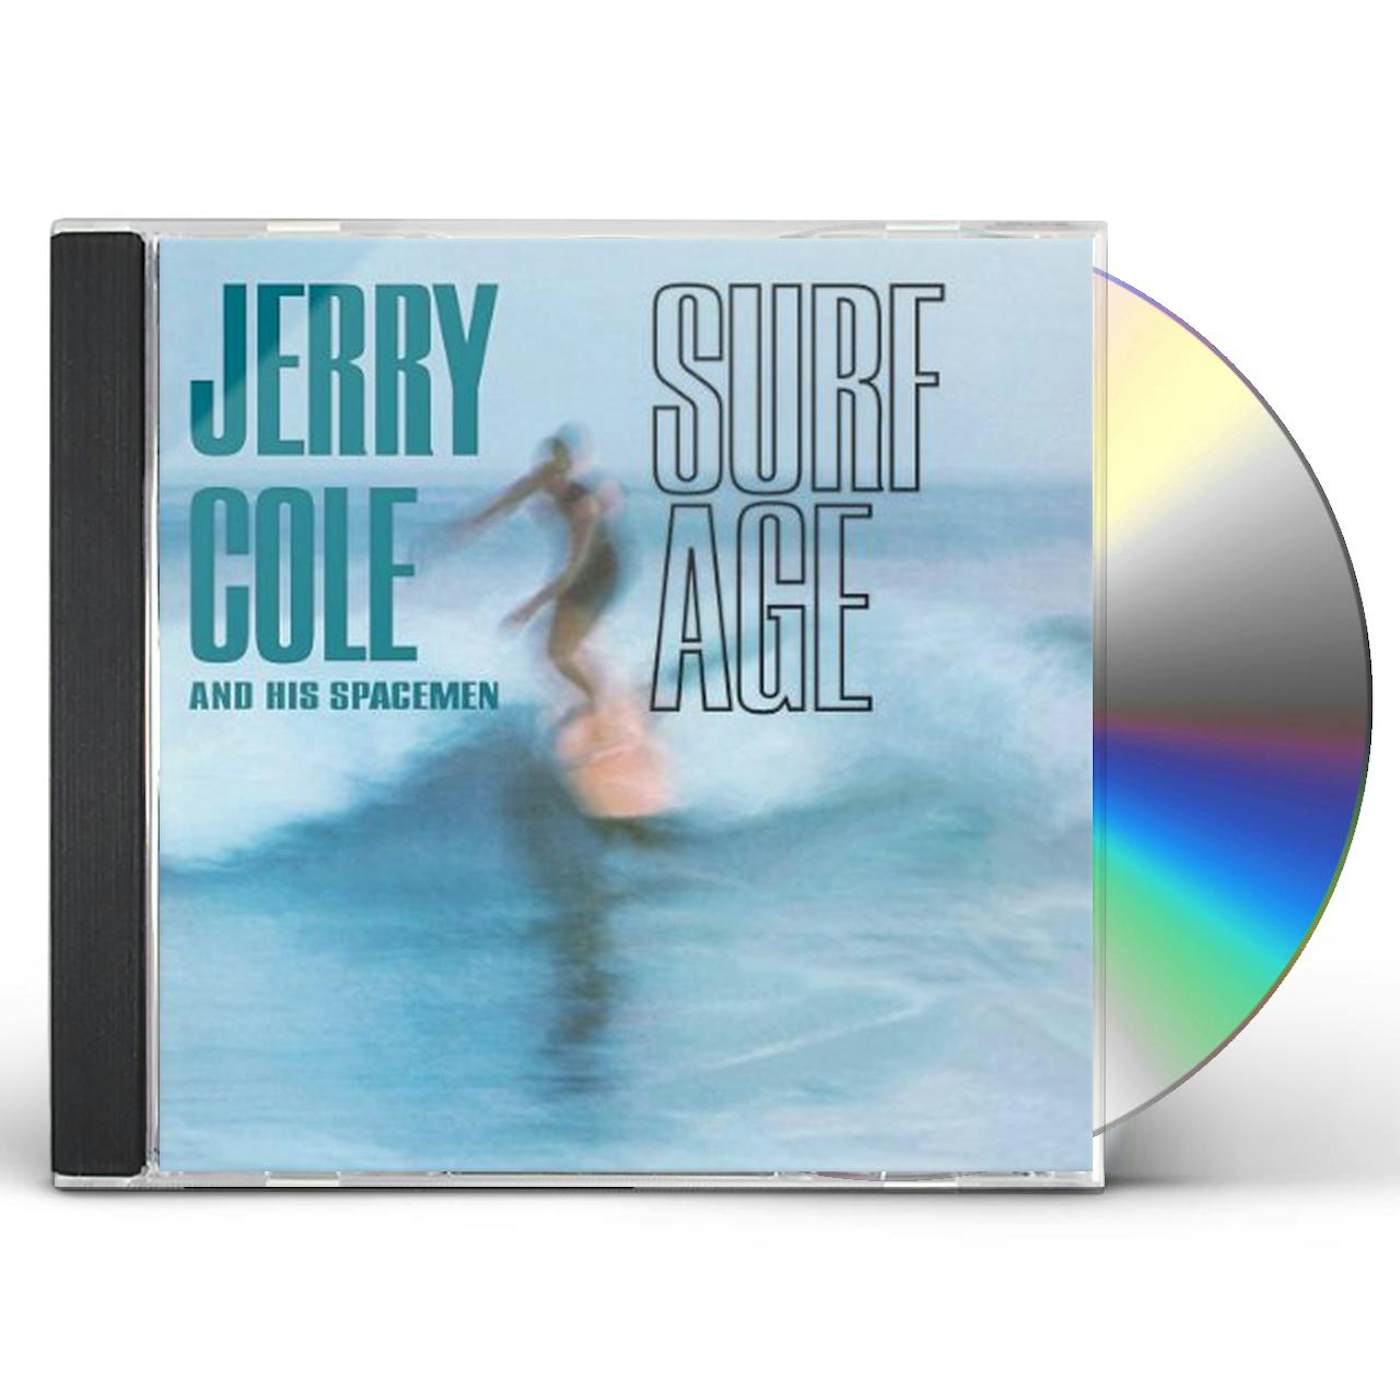 Jerry Cole SURF AGE CD